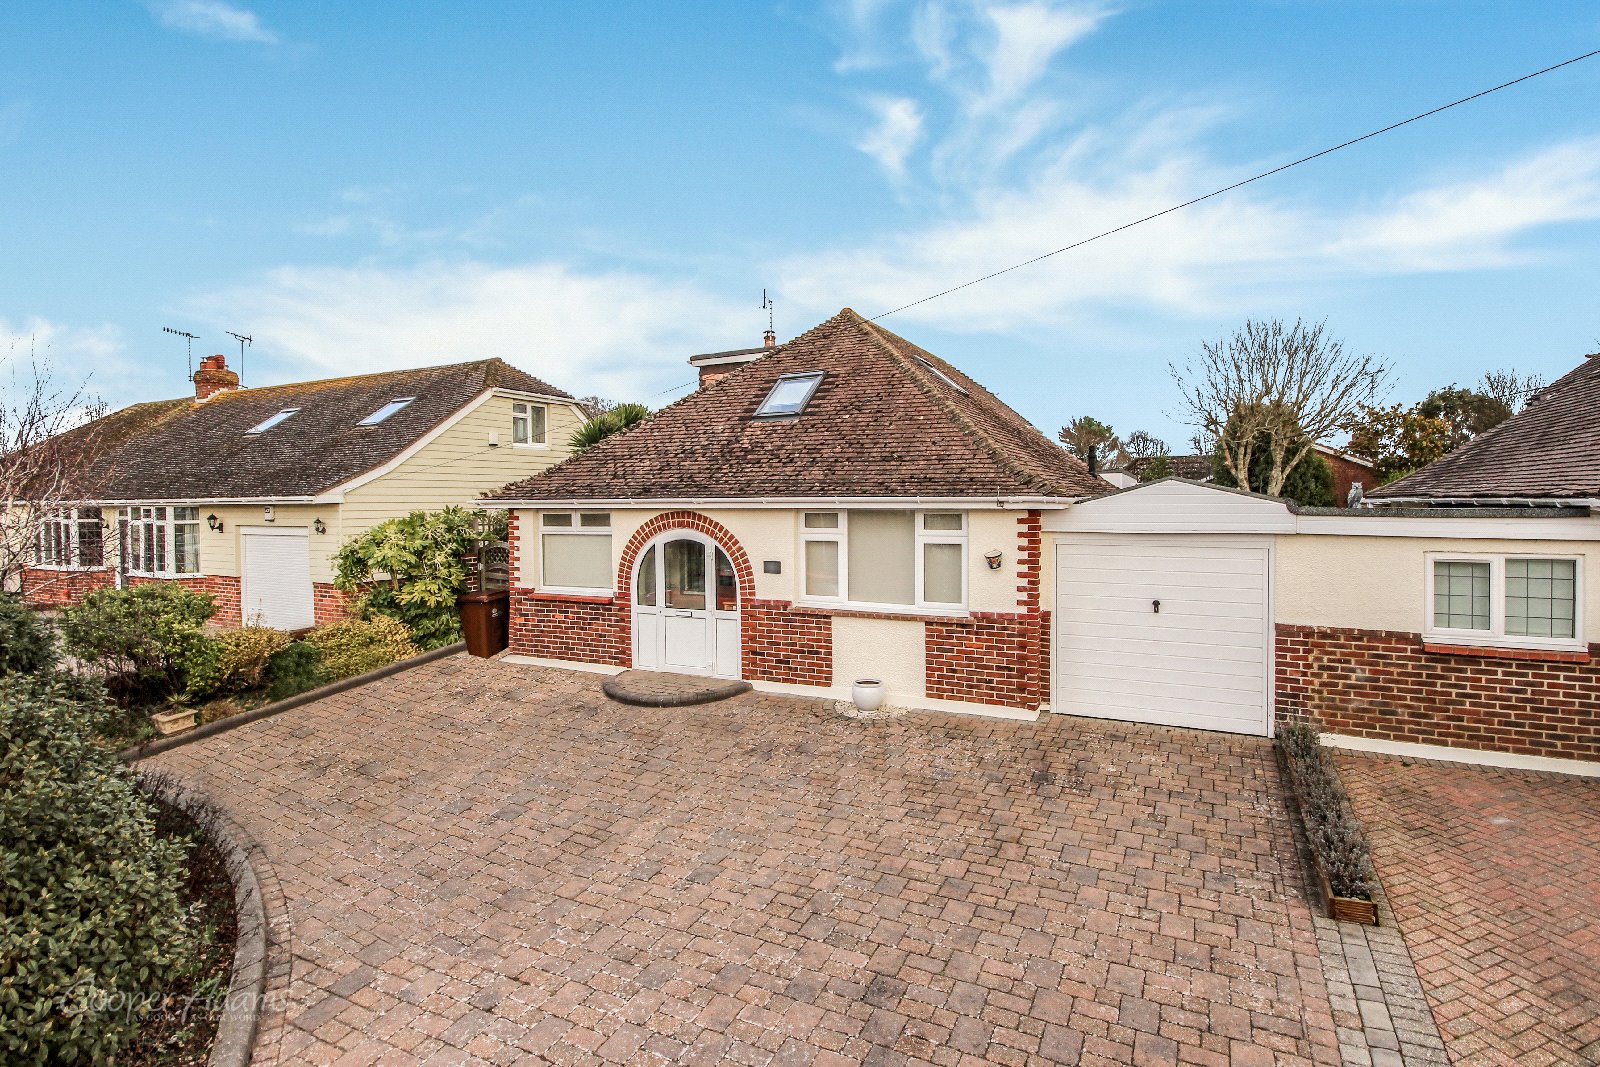 3 bed bungalow for sale in North Lane, Rustington, BN16